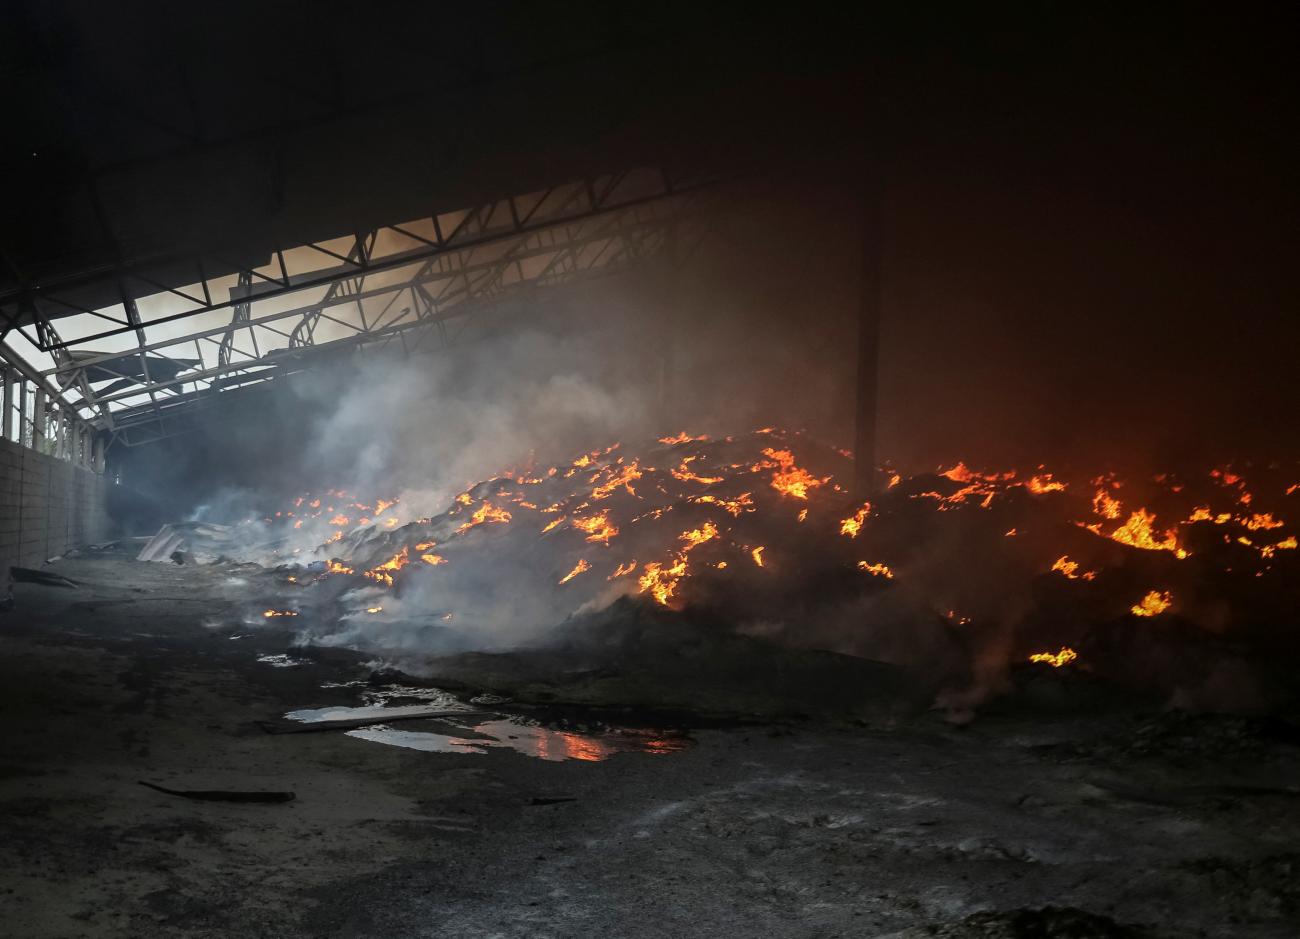 Inside the dark interior of a grain silo a huge pile of seeds burn, appearing like hot orange coals, below a roof that has been partially destroyed by shelling during Russia's attack on Ukraine. Photo was taken in the Donetsk region of Ukraine, on May 31, 2022. 